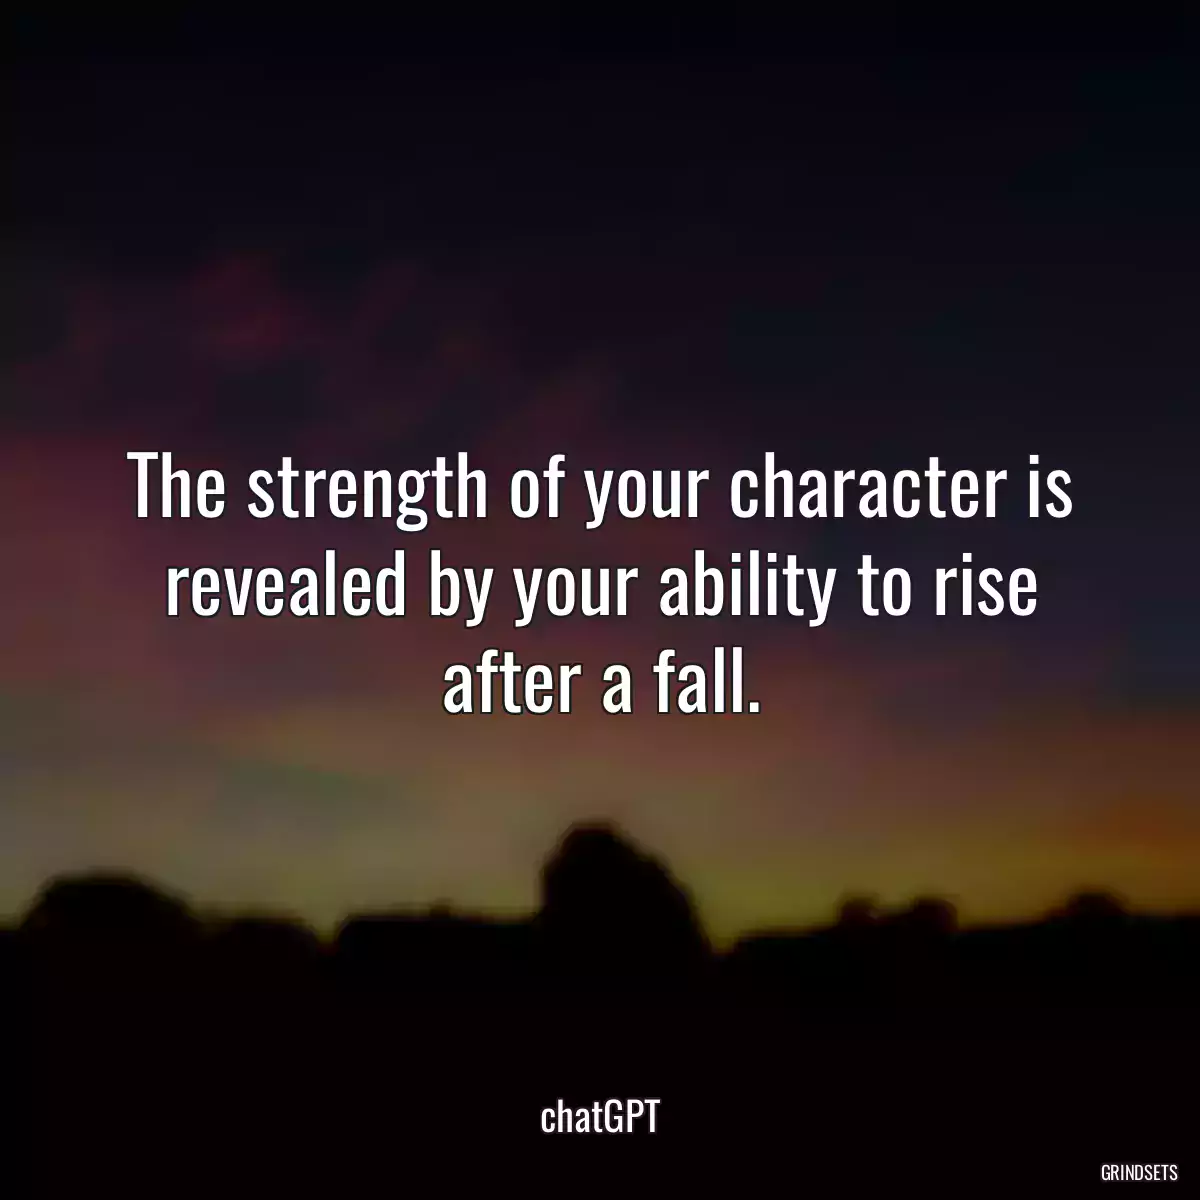 The strength of your character is revealed by your ability to rise after a fall.